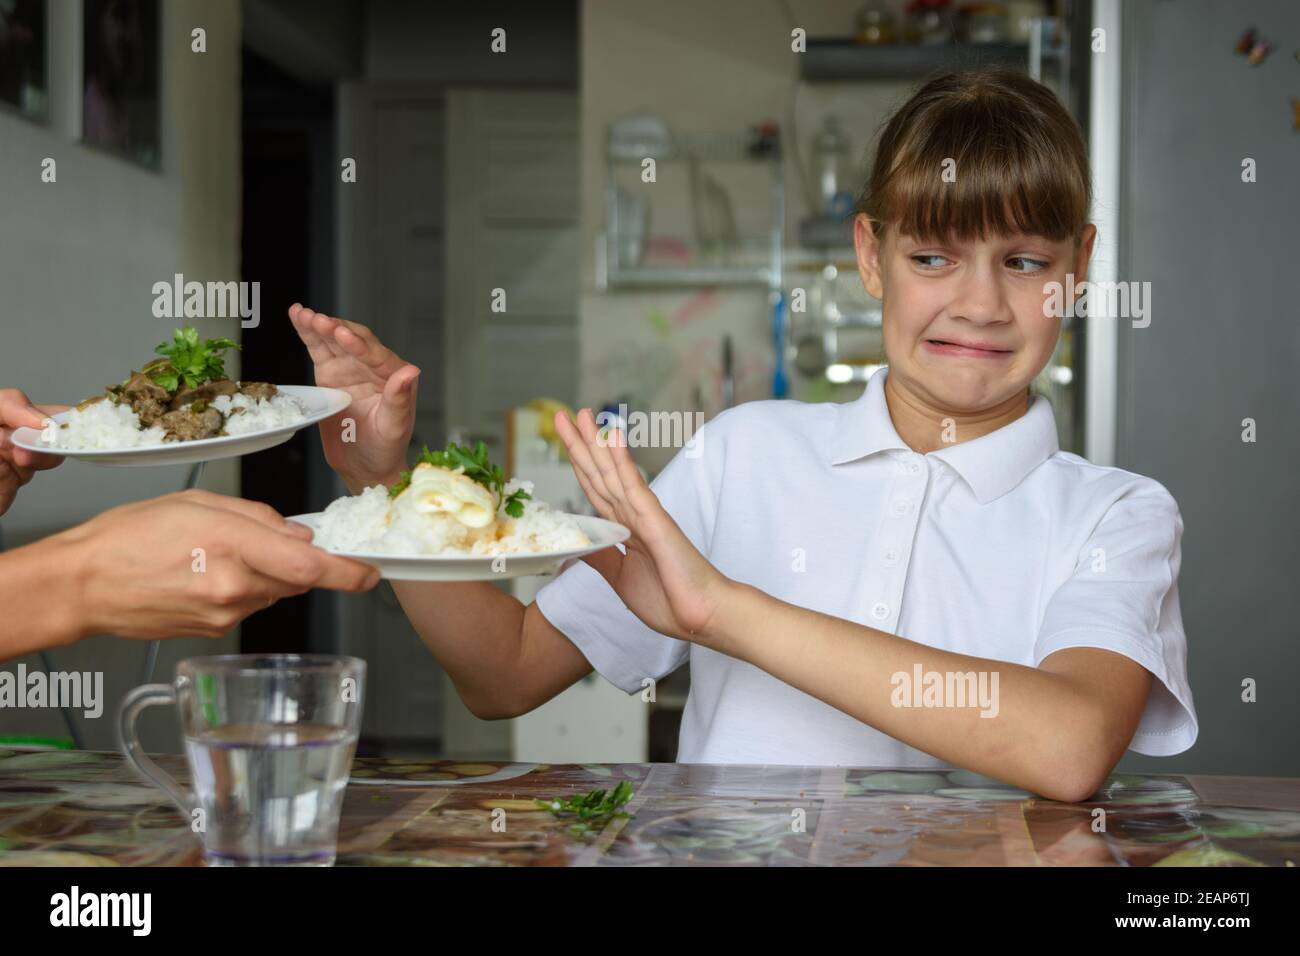 The girl at the dinner table refuses the food offered Stock Photo